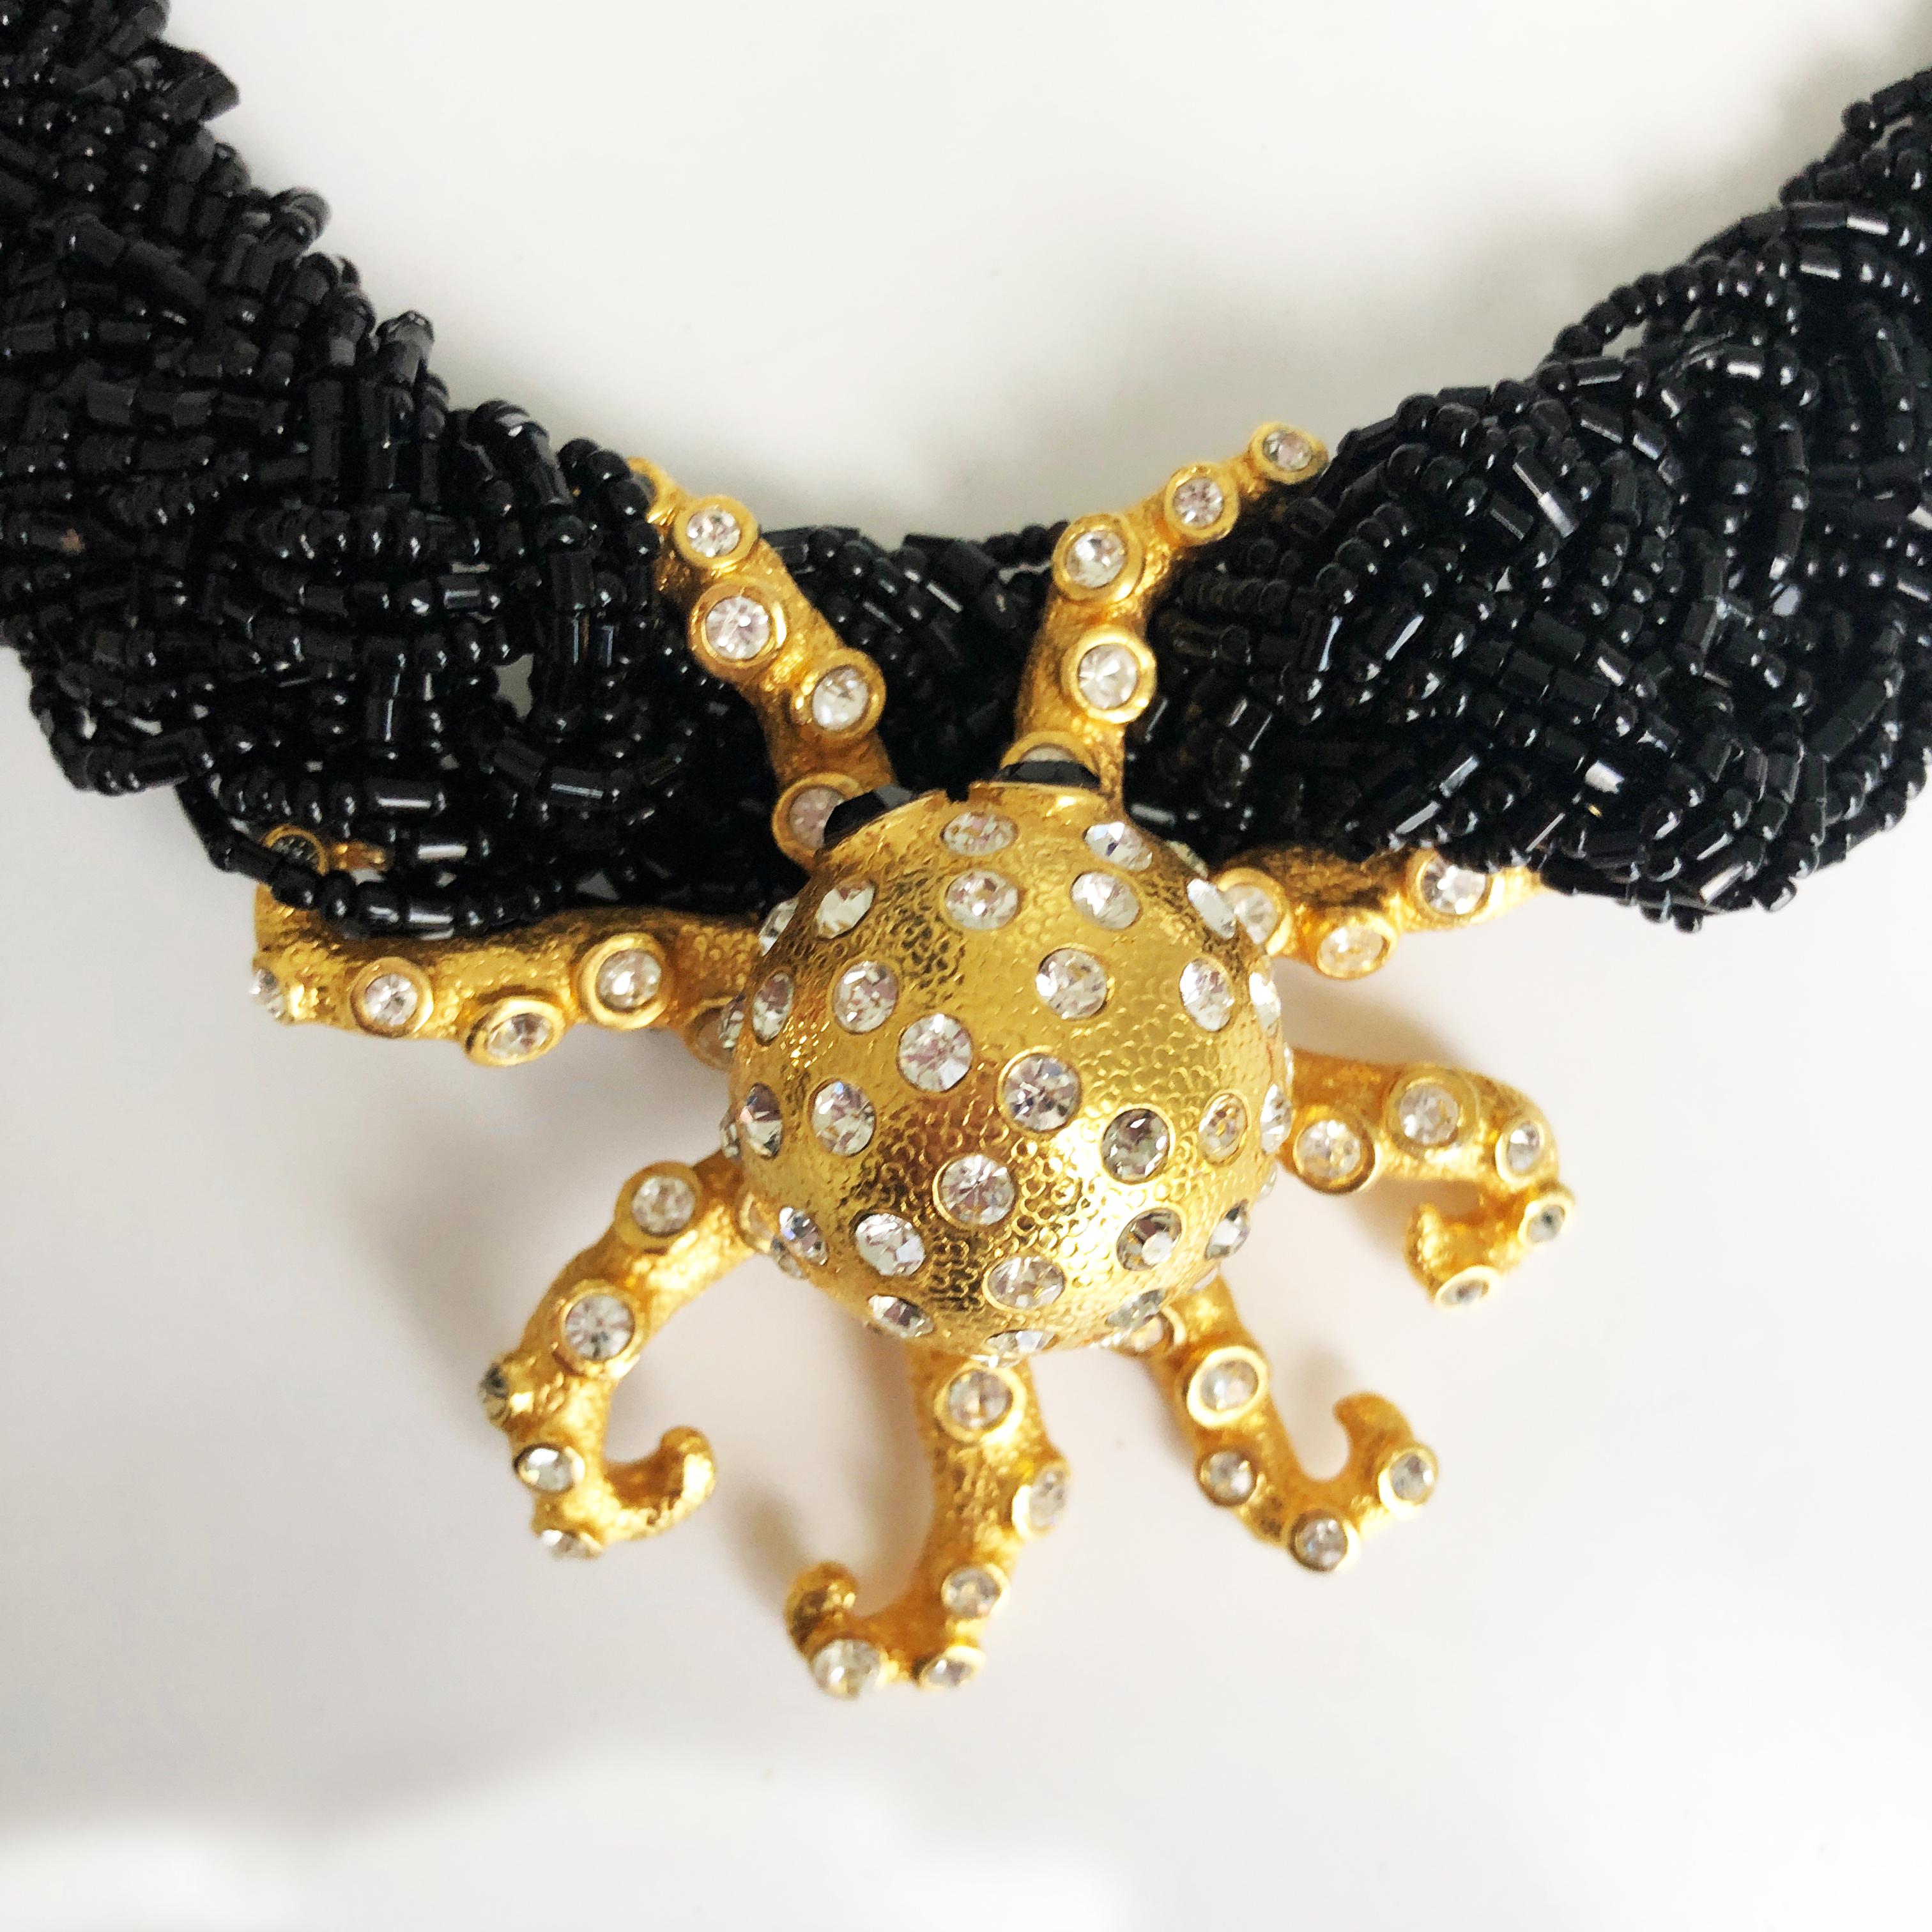 Embellished Octopus Necklace by Stephanie Lake Design Rare Statement Piece For Sale 3